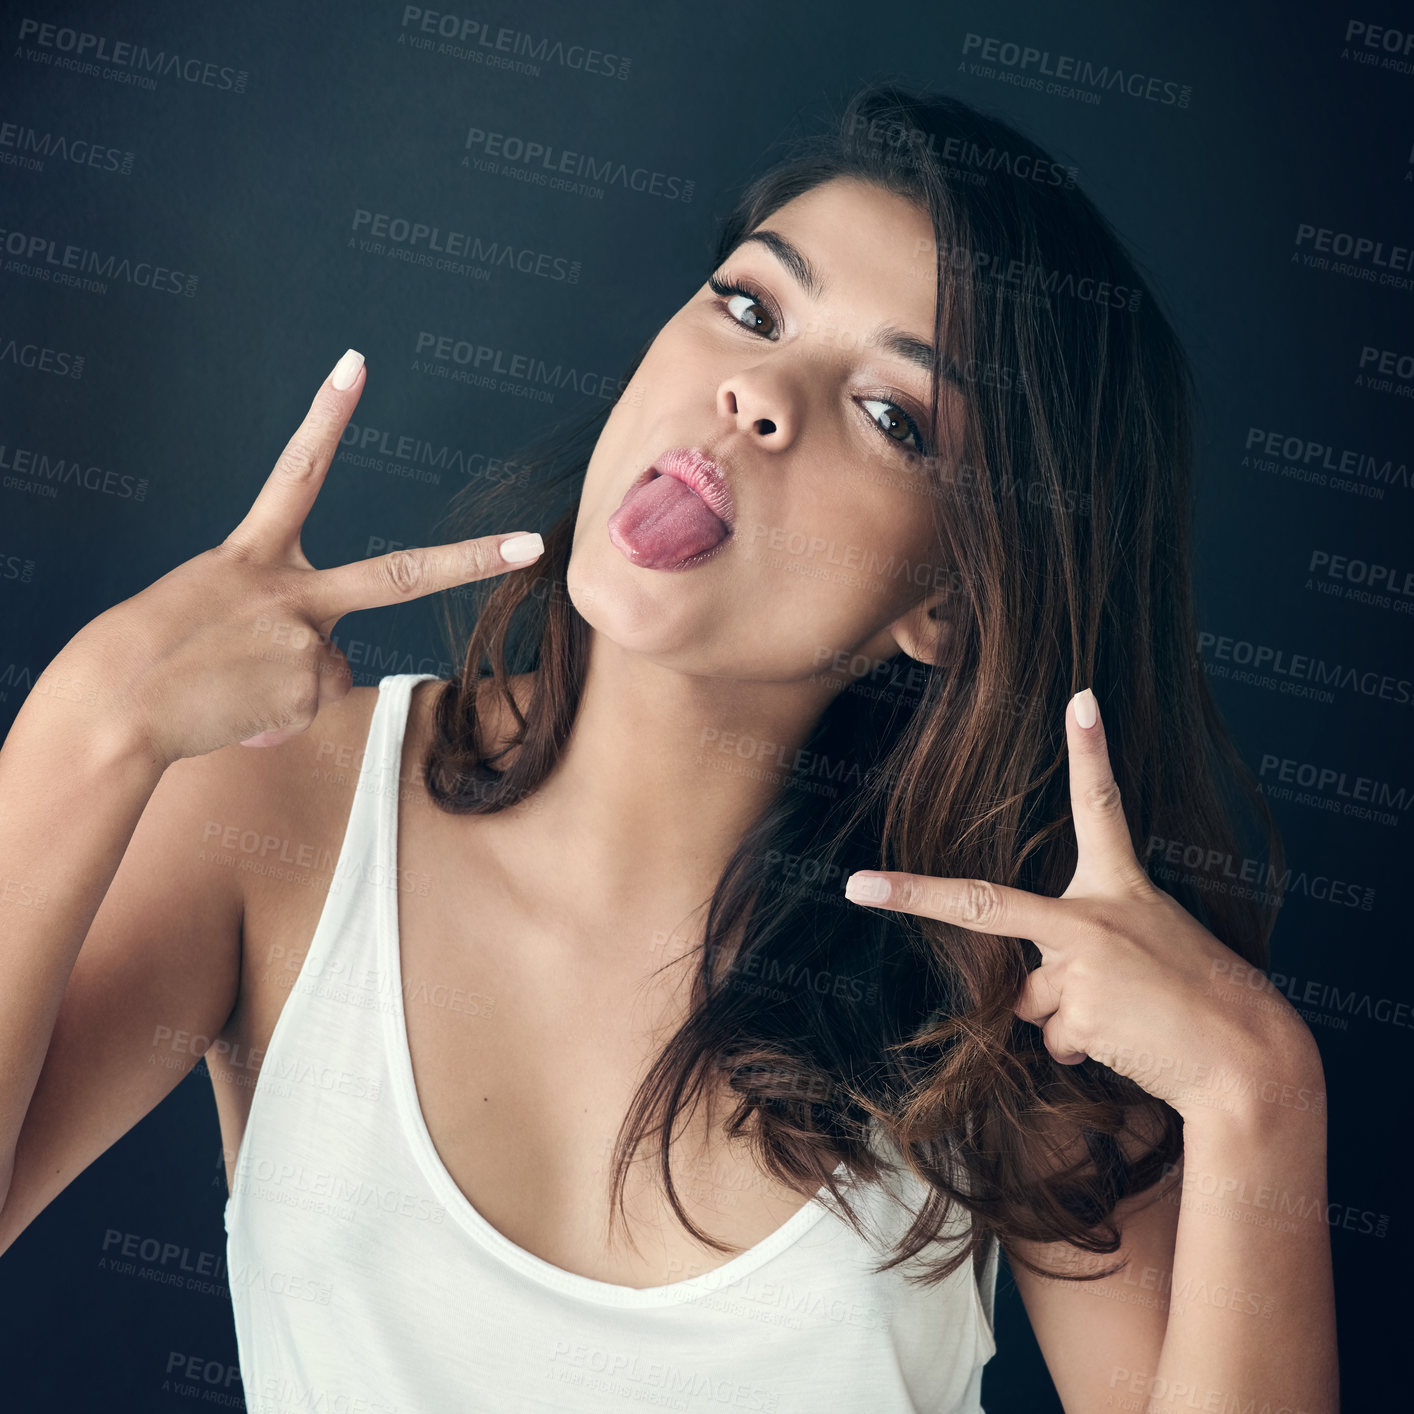 Buy stock photo Cropped shot of a beautiful young woman sticking out tongue against a grey background